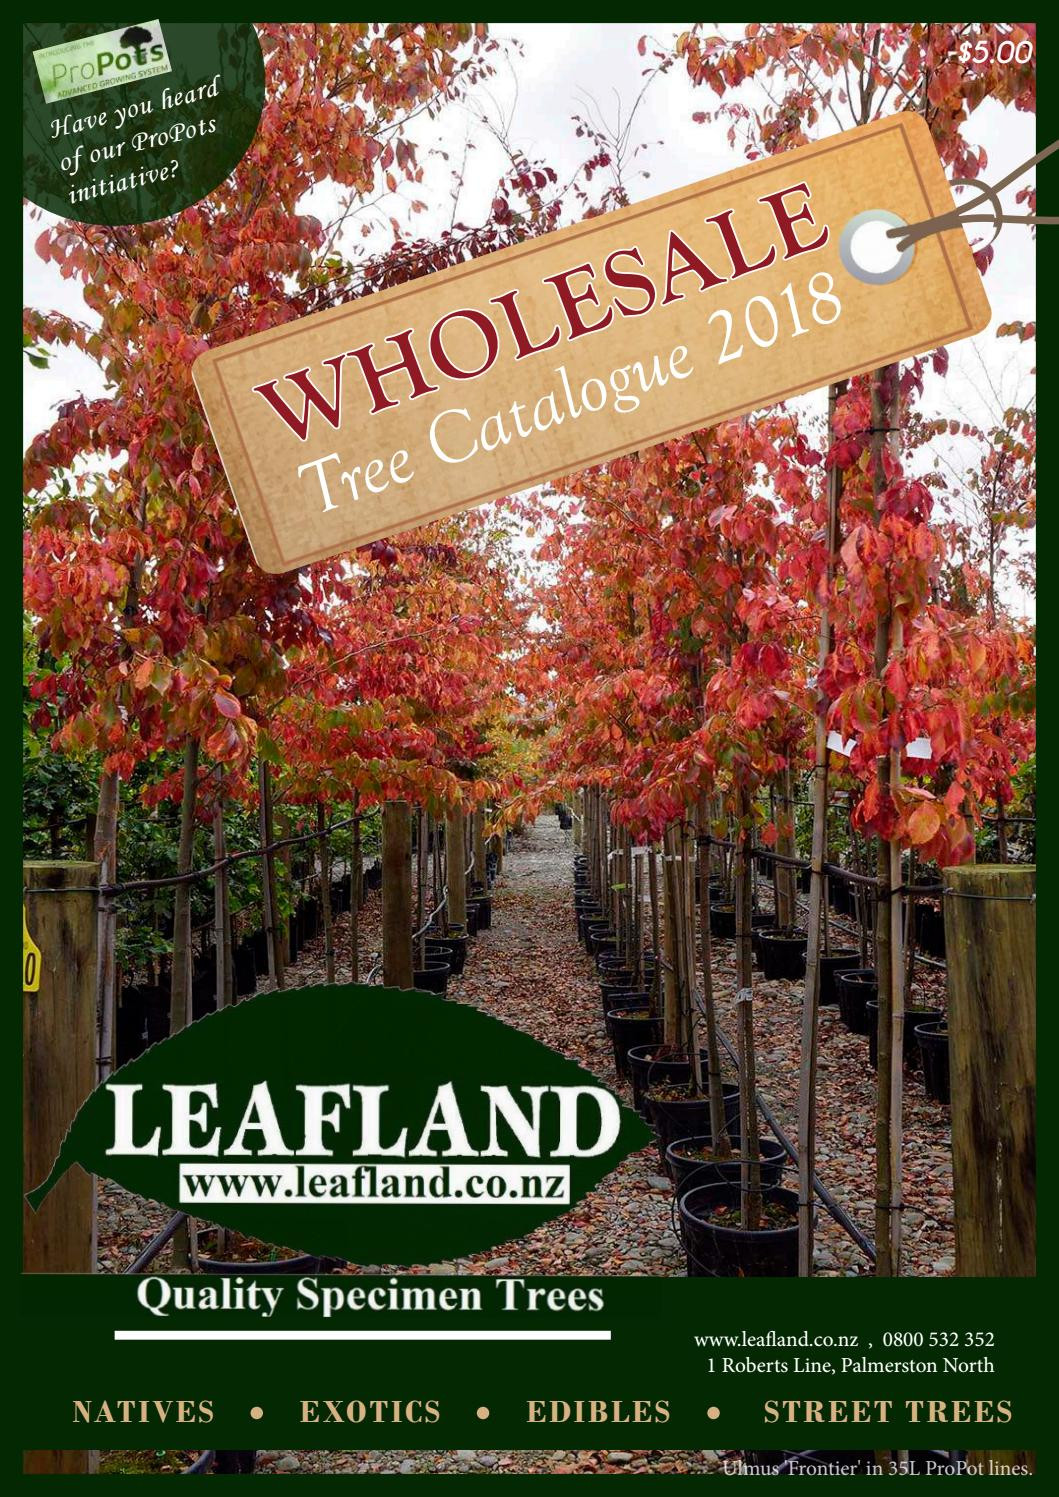 Vase Shaped Evergreen Shrubs Of Leafland 2018 Catalogue by Leafland Quality Specimen Trees issuu Throughout Page 1